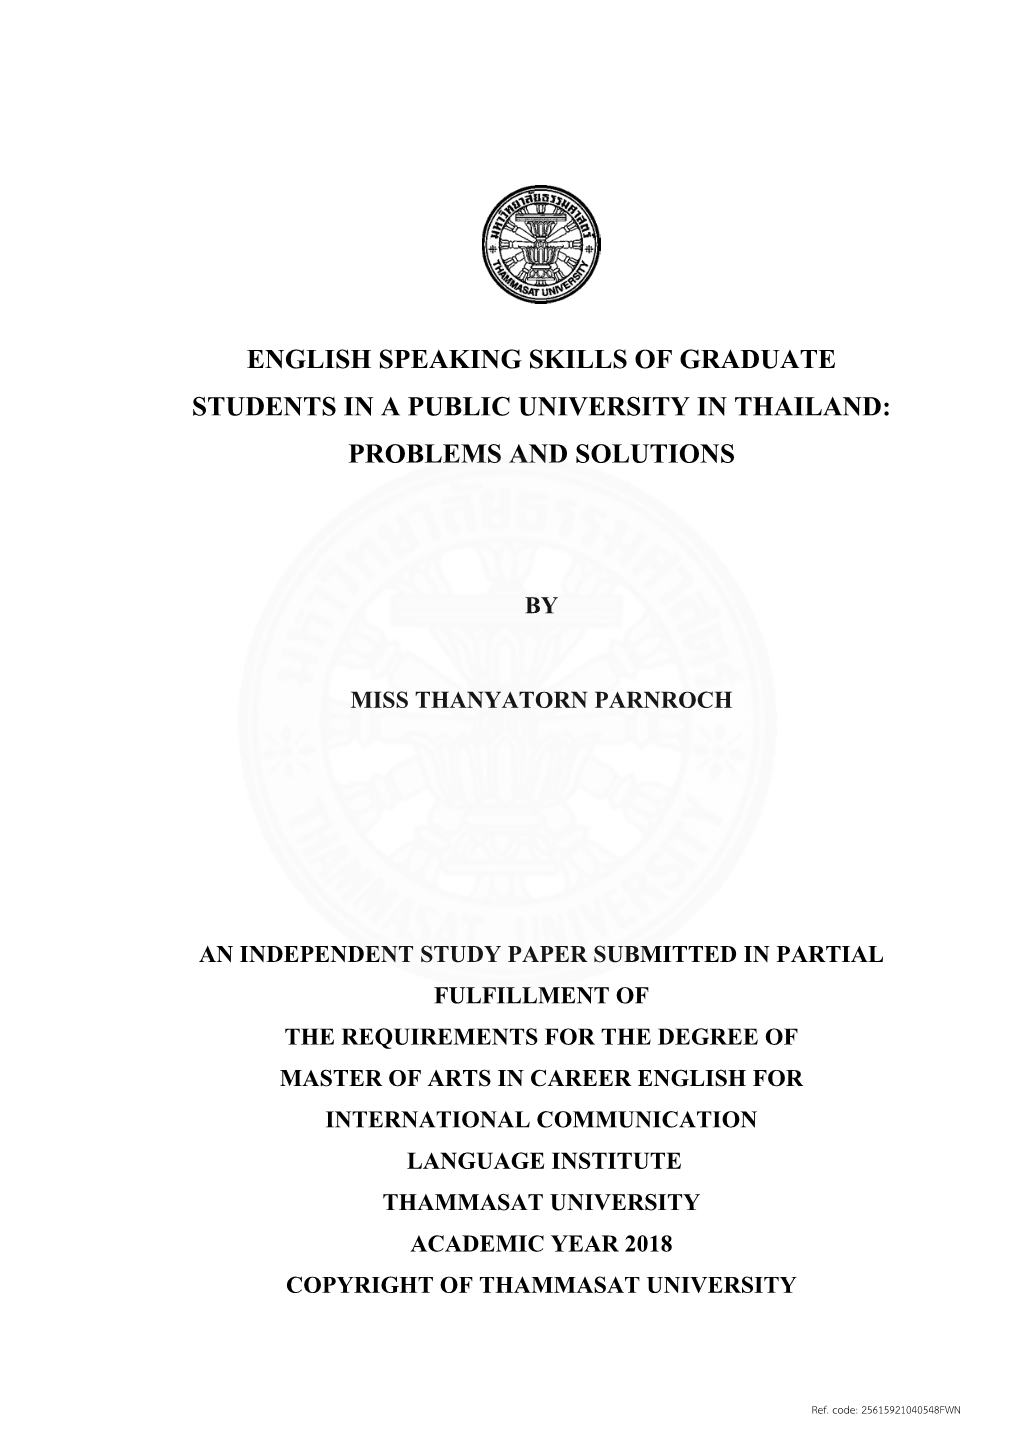 English Speaking Skills of Graduate Students in a Public University in Thailand: Problems and Solutions